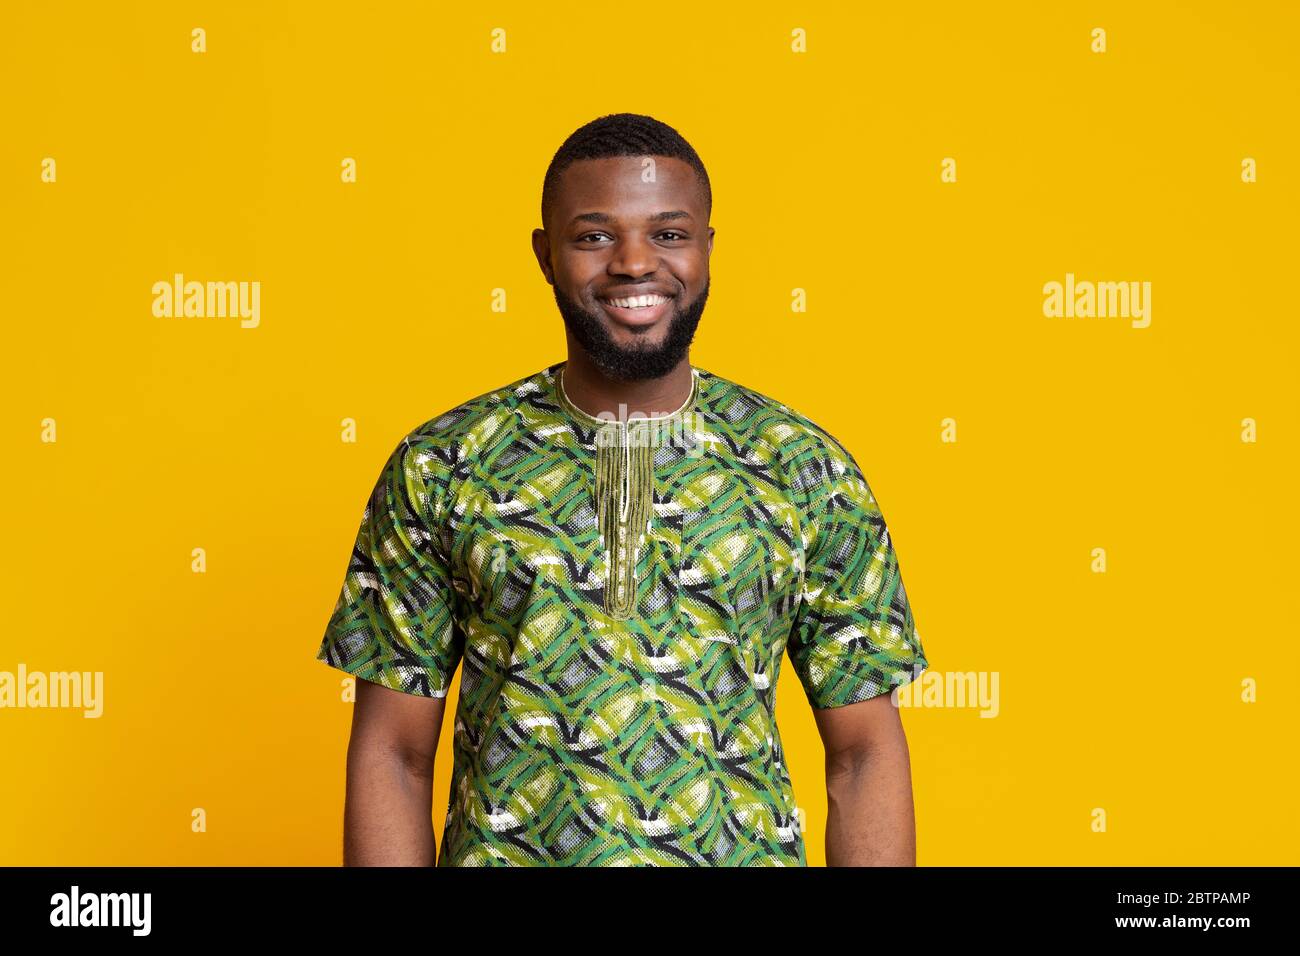 African man in green authentic clothes posing over yellow background Stock Photo